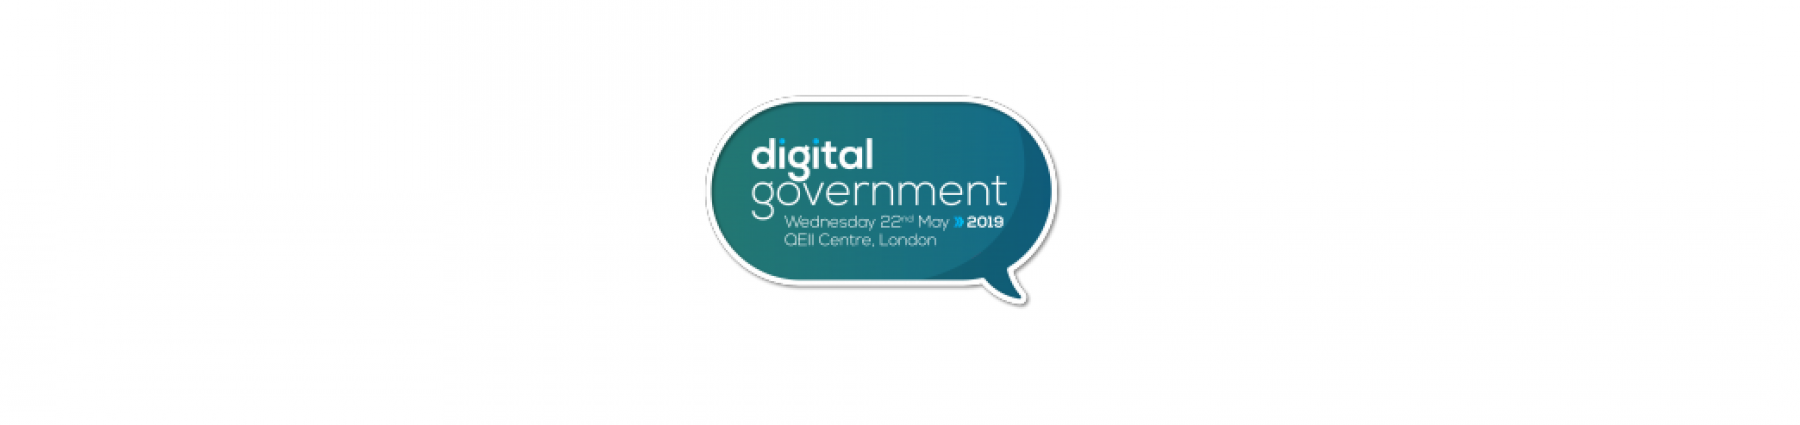 Digital Government Conference